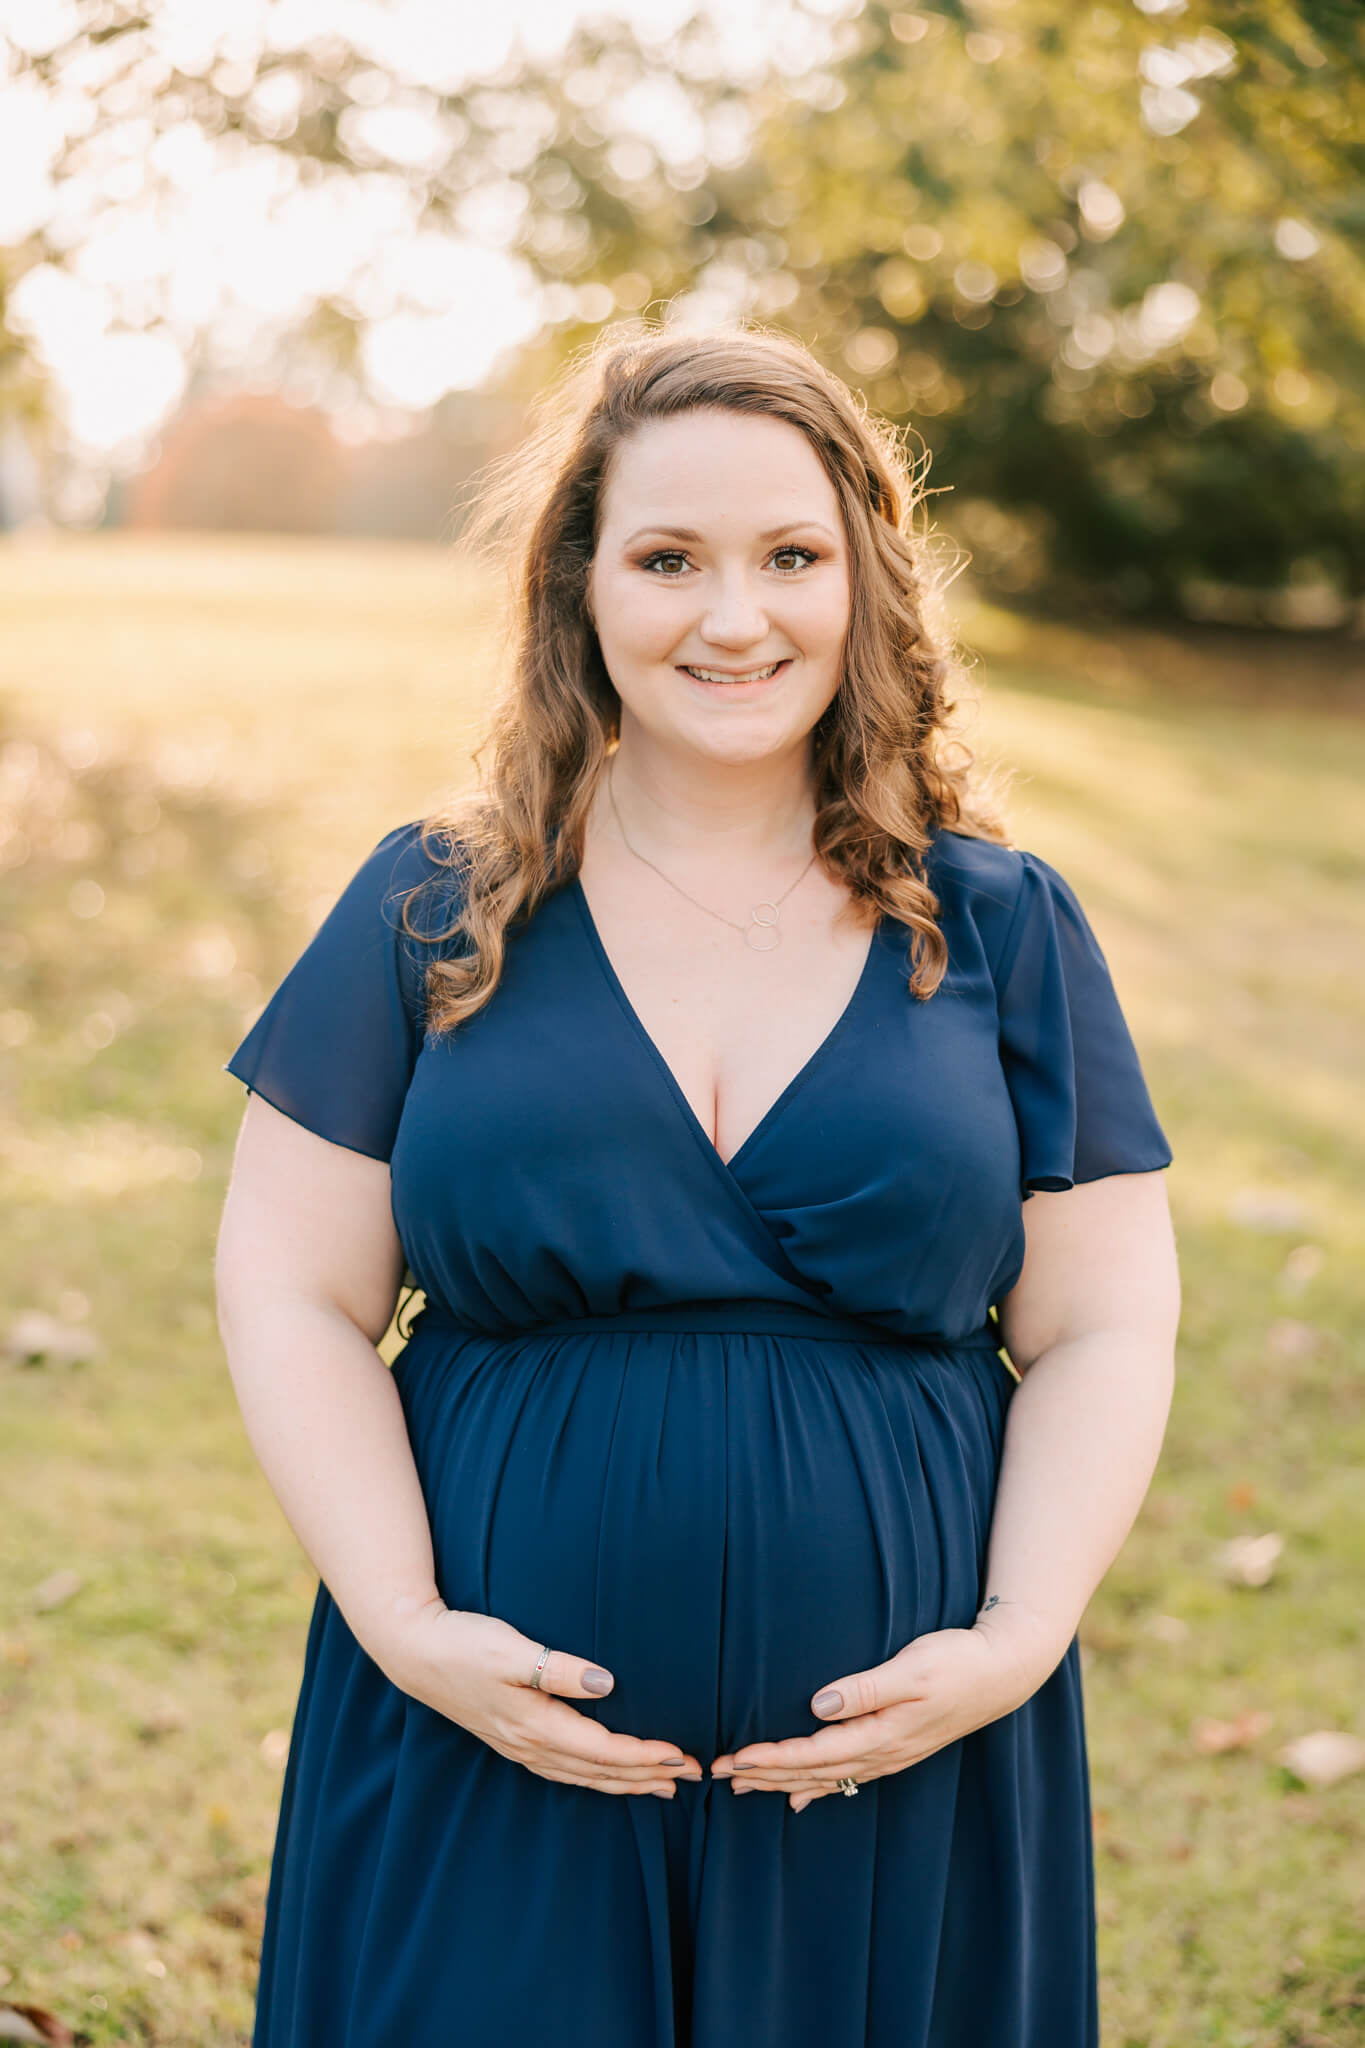 Soon to be mom showing off her baby bump during her columbia sc maternity photography session. Dress is provided by molly berry. Client used Stork Imaging Lexington SC for her gender reveal ultrasound.